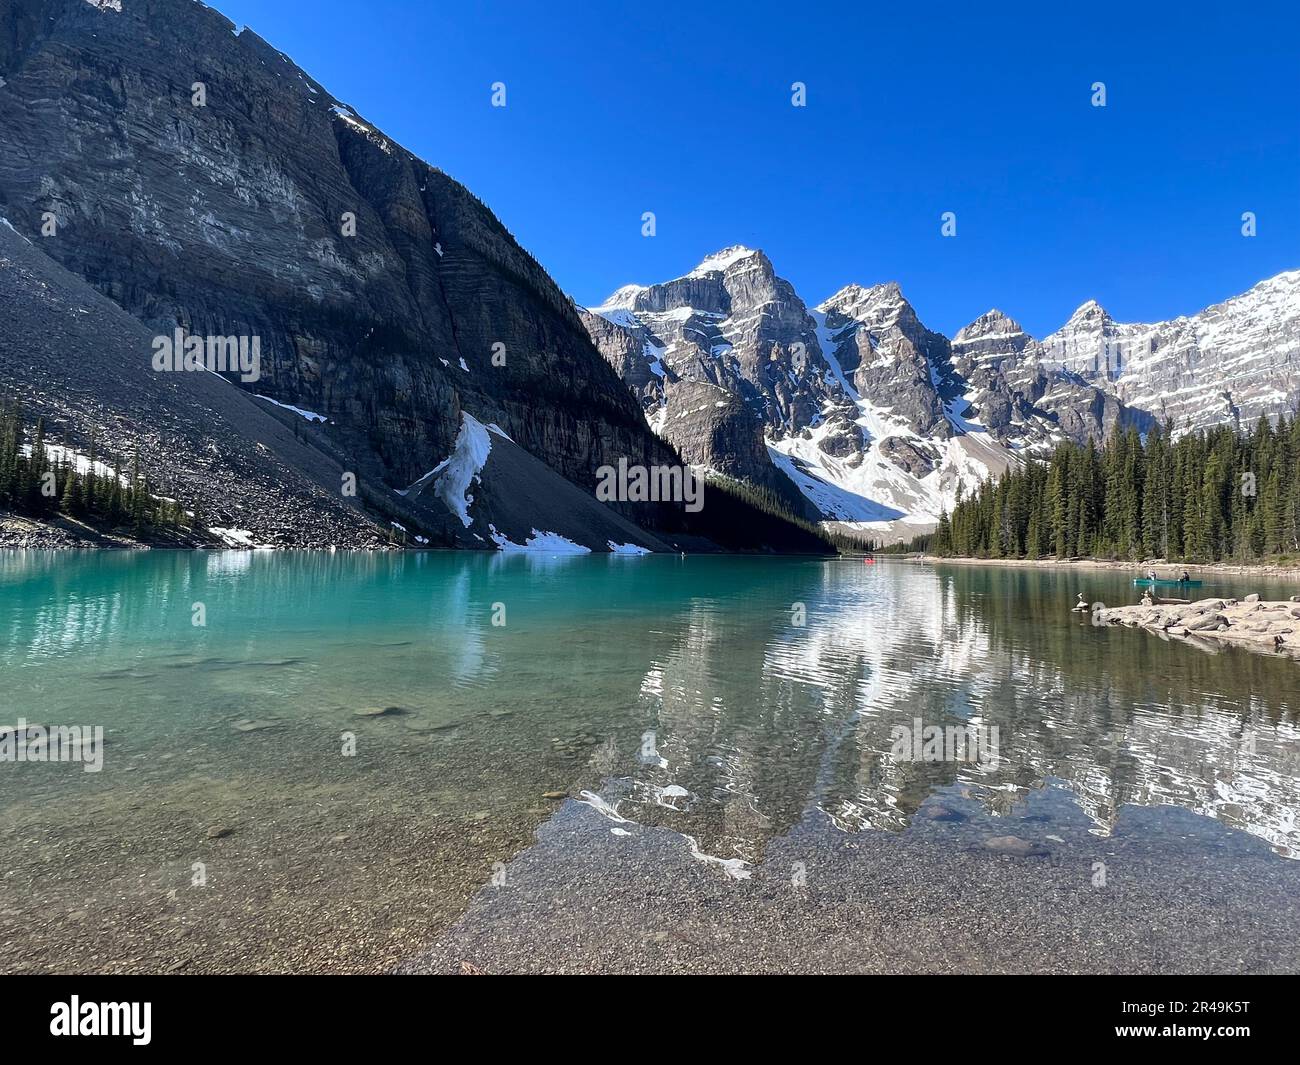 A scenic view of a lake situated in a mountainous landscape, with crystal blue waters lapping against the shoreline Stock Photo